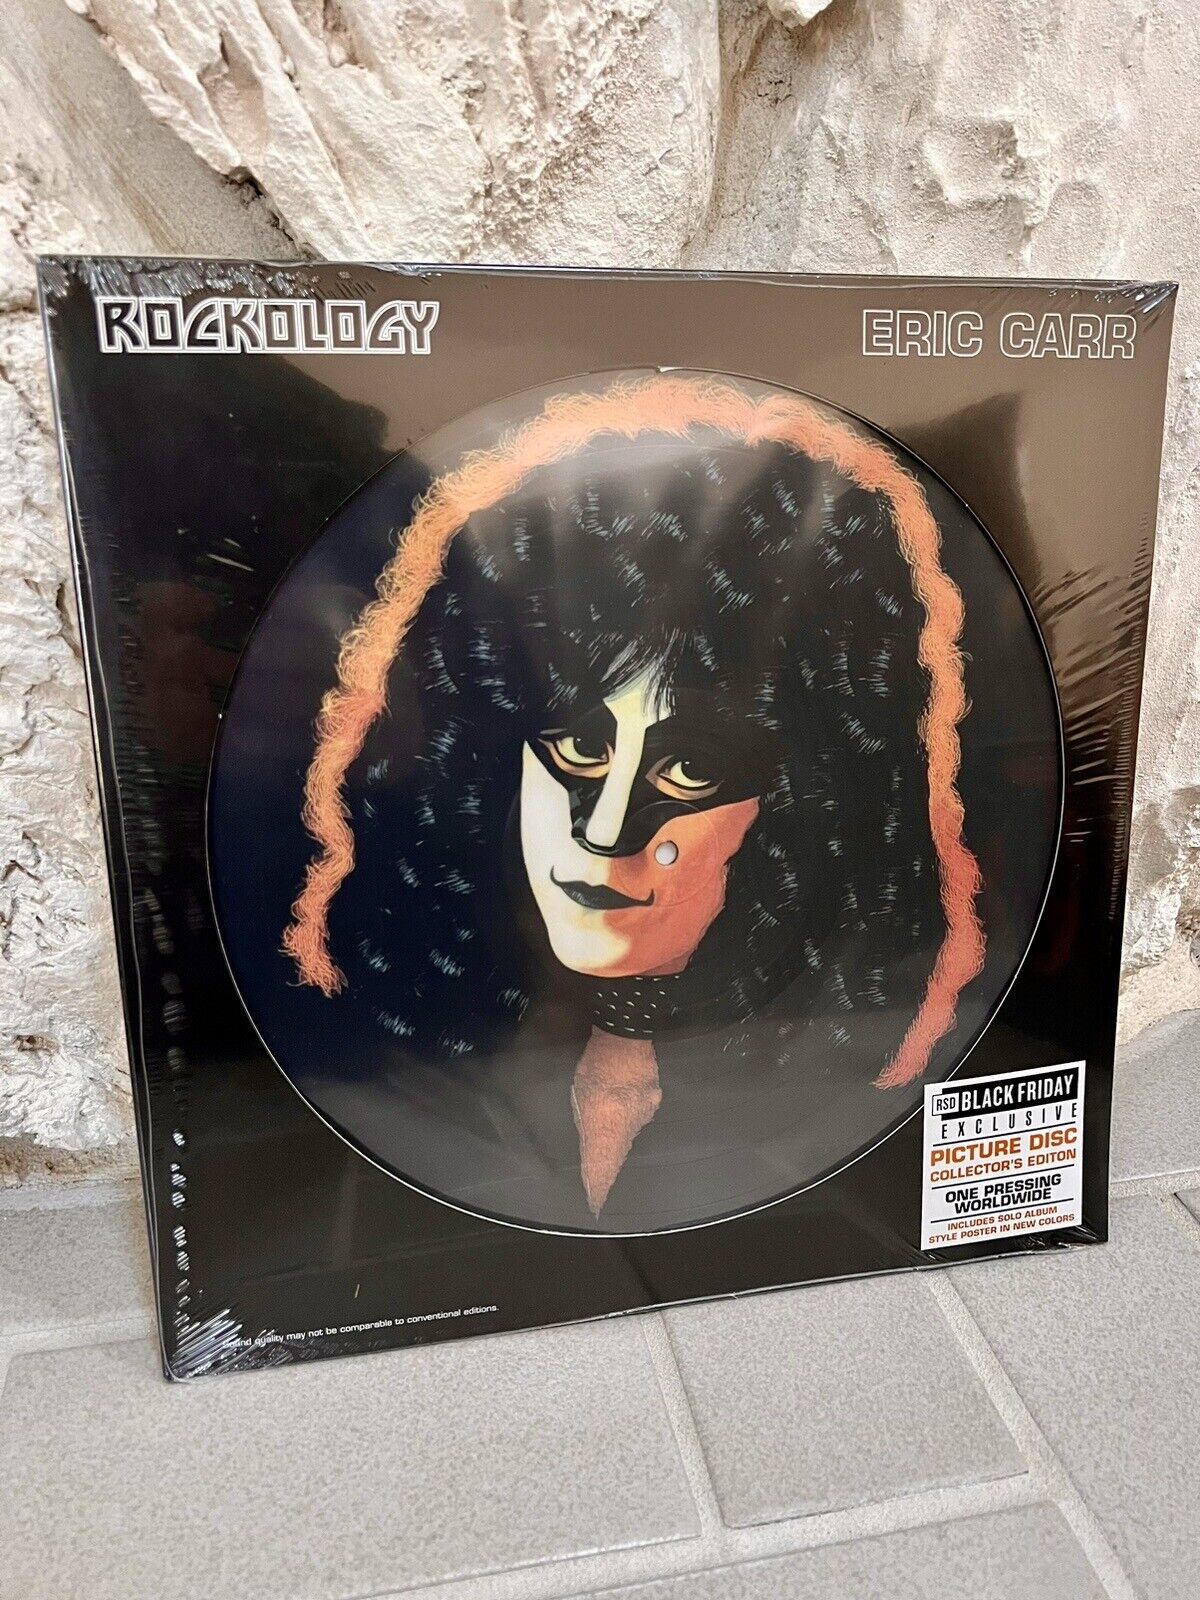 ERIC CARR KISS ROCKOLOGY PICTURE LP RSD Black Friday 2023 Record Store Day Rare✅